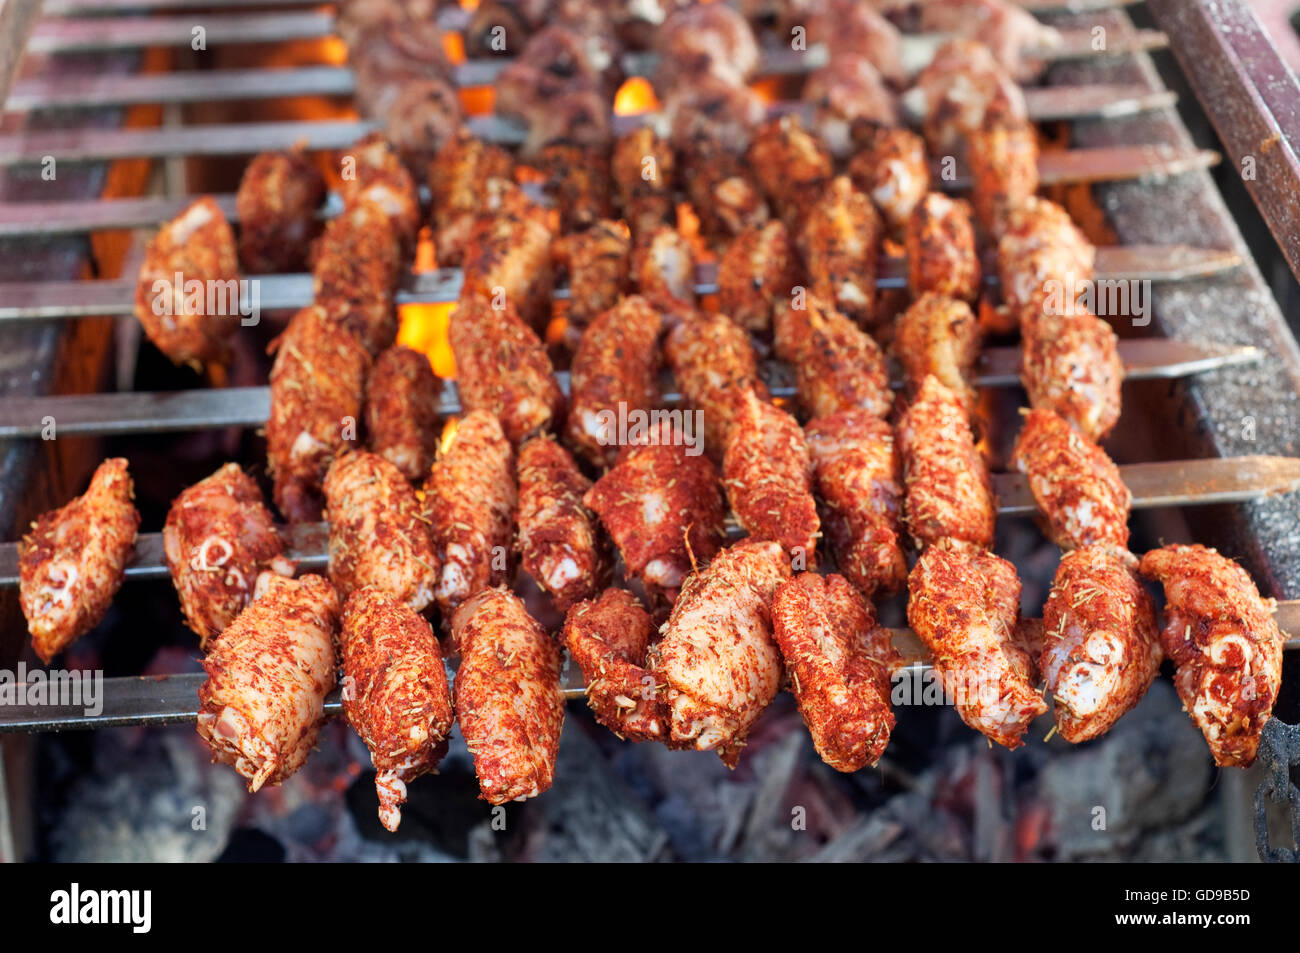 Italy, Lombardy, Street Food, Spicy Chicken Wings on the Grill Stock Photo